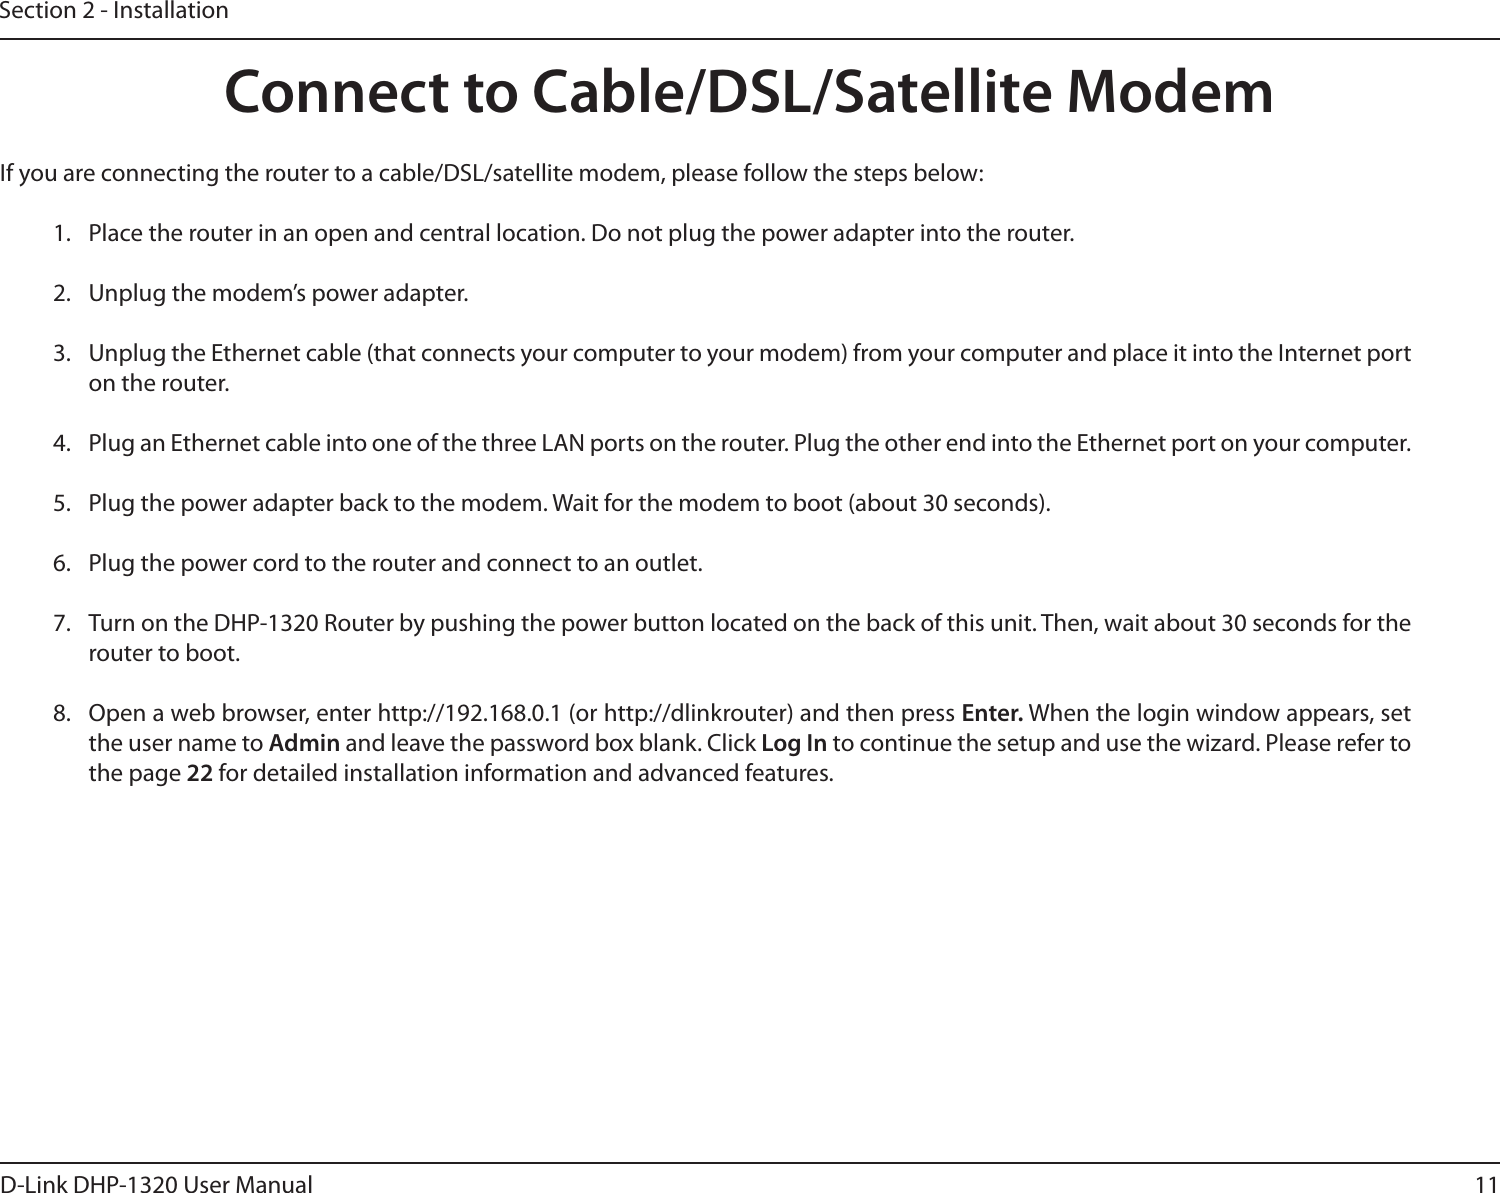 11D-Link DHP-1320 User ManualSection 2 - InstallationIf you are connecting the router to a cable/DSL/satellite modem, please follow the steps below:1.  Place the router in an open and central location. Do not plug the power adapter into the router.2.  Unplug the modem’s power adapter. 3.  Unplug the Ethernet cable (that connects your computer to your modem) from your computer and place it into the Internet port on the router.4.  Plug an Ethernet cable into one of the three LAN ports on the router. Plug the other end into the Ethernet port on your computer.5.  Plug the power adapter back to the modem. Wait for the modem to boot (about 30 seconds).6.  Plug the power cord to the router and connect to an outlet. 7.  Turn on the DHP-1320 Router by pushing the power button located on the back of this unit. Then, wait about 30 seconds for the router to boot.8.  Open a web browser, enter http://192.168.0.1 (or http://dlinkrouter) and then press Enter. When the login window appears, set the user name to Admin and leave the password box blank. Click Log In to continue the setup and use the wizard. Please refer to the page 22 for detailed installation information and advanced features.Connect to Cable/DSL/Satellite Modem